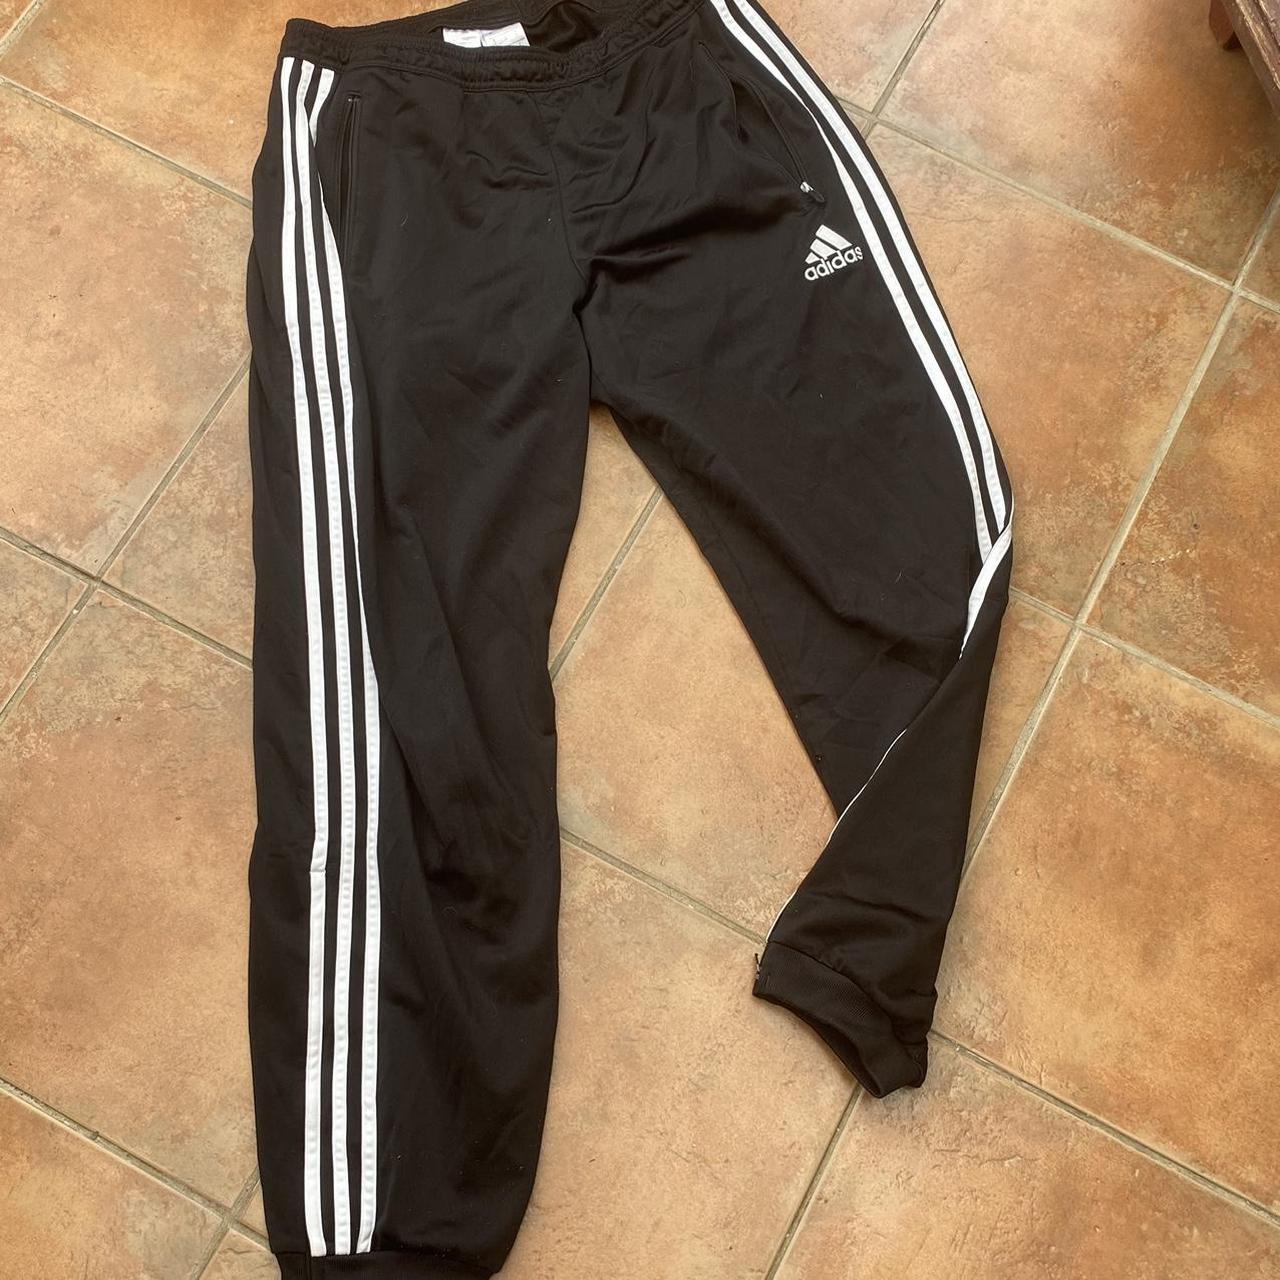 Adidas Men's Black and White Joggers-tracksuits | Depop